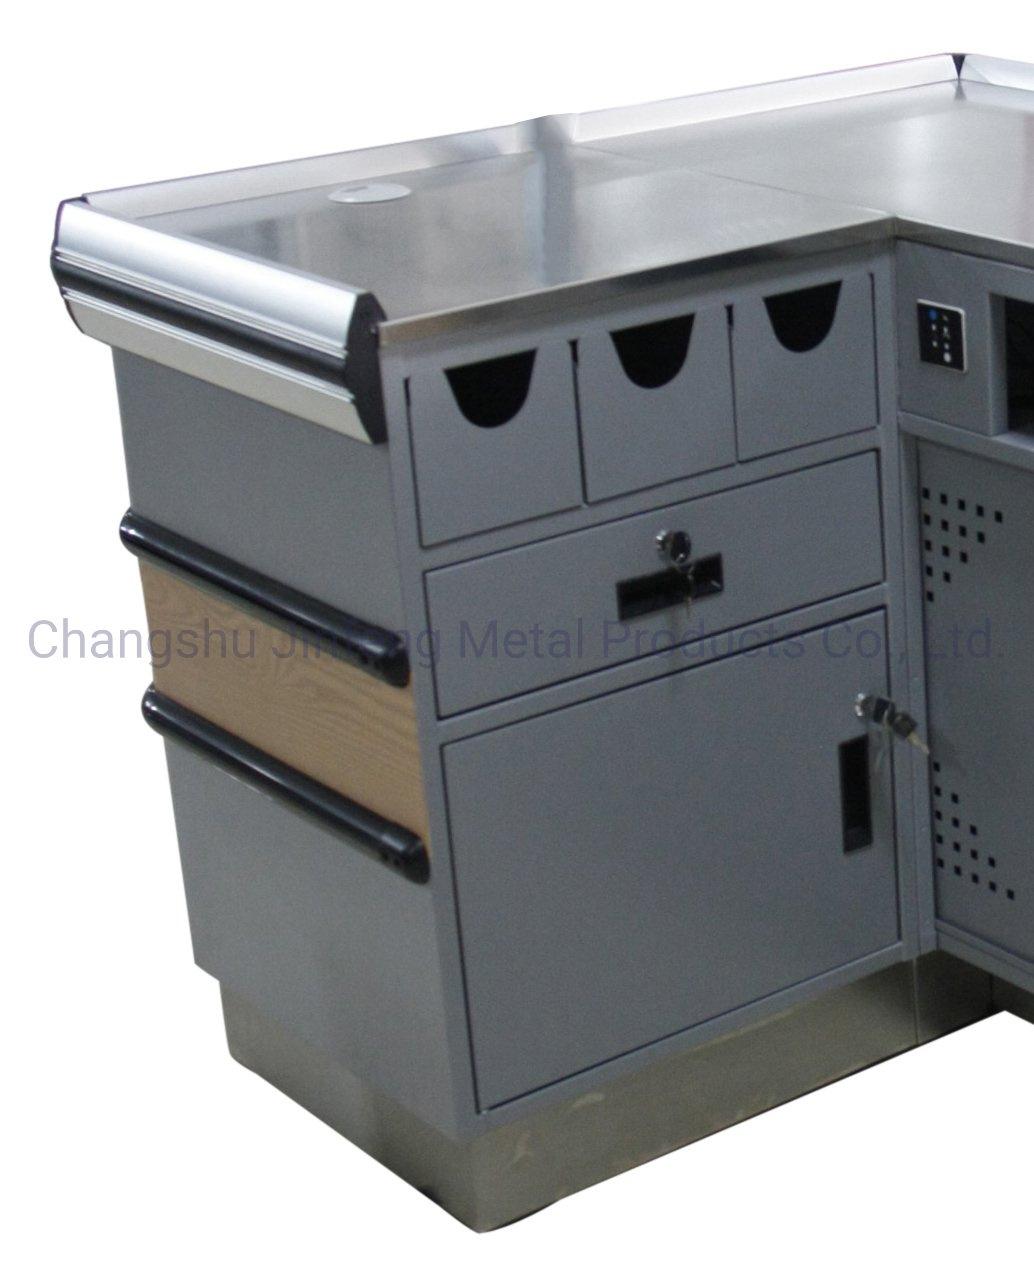 Supermarket Checkout Counter Wood Grain Transfer Printing Cashier Desk with Keyboard Holder Jf-Cc-027